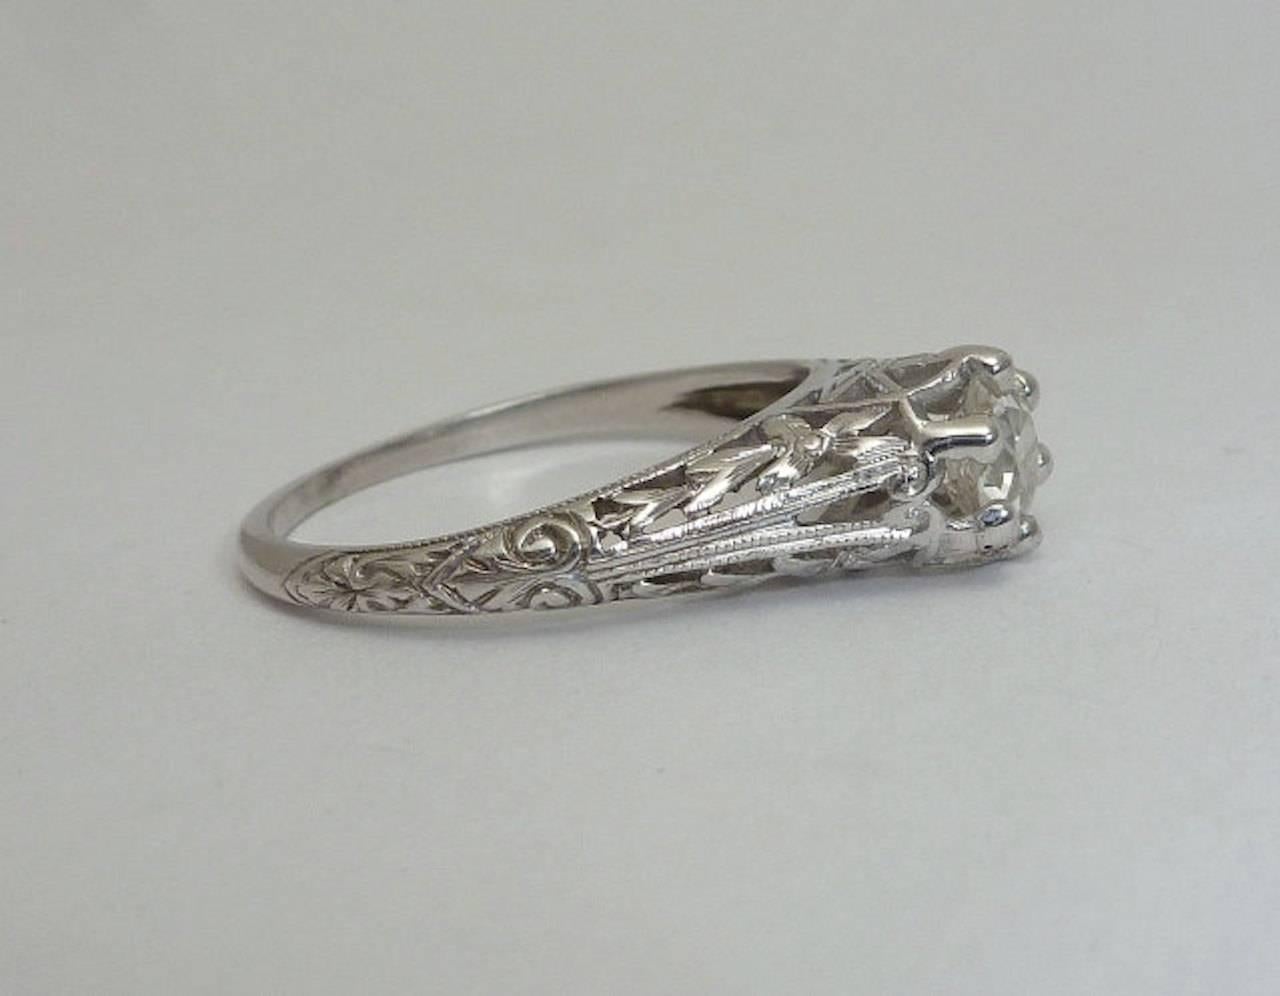 =A rare opportunity to own a wonderful example of an original Orange Blossom pattern diamond ring in luxurious platinum. In beautiful condition, this original hand engraved ring is from the Orange Blossom line by Traub of Michigan.

Once the most